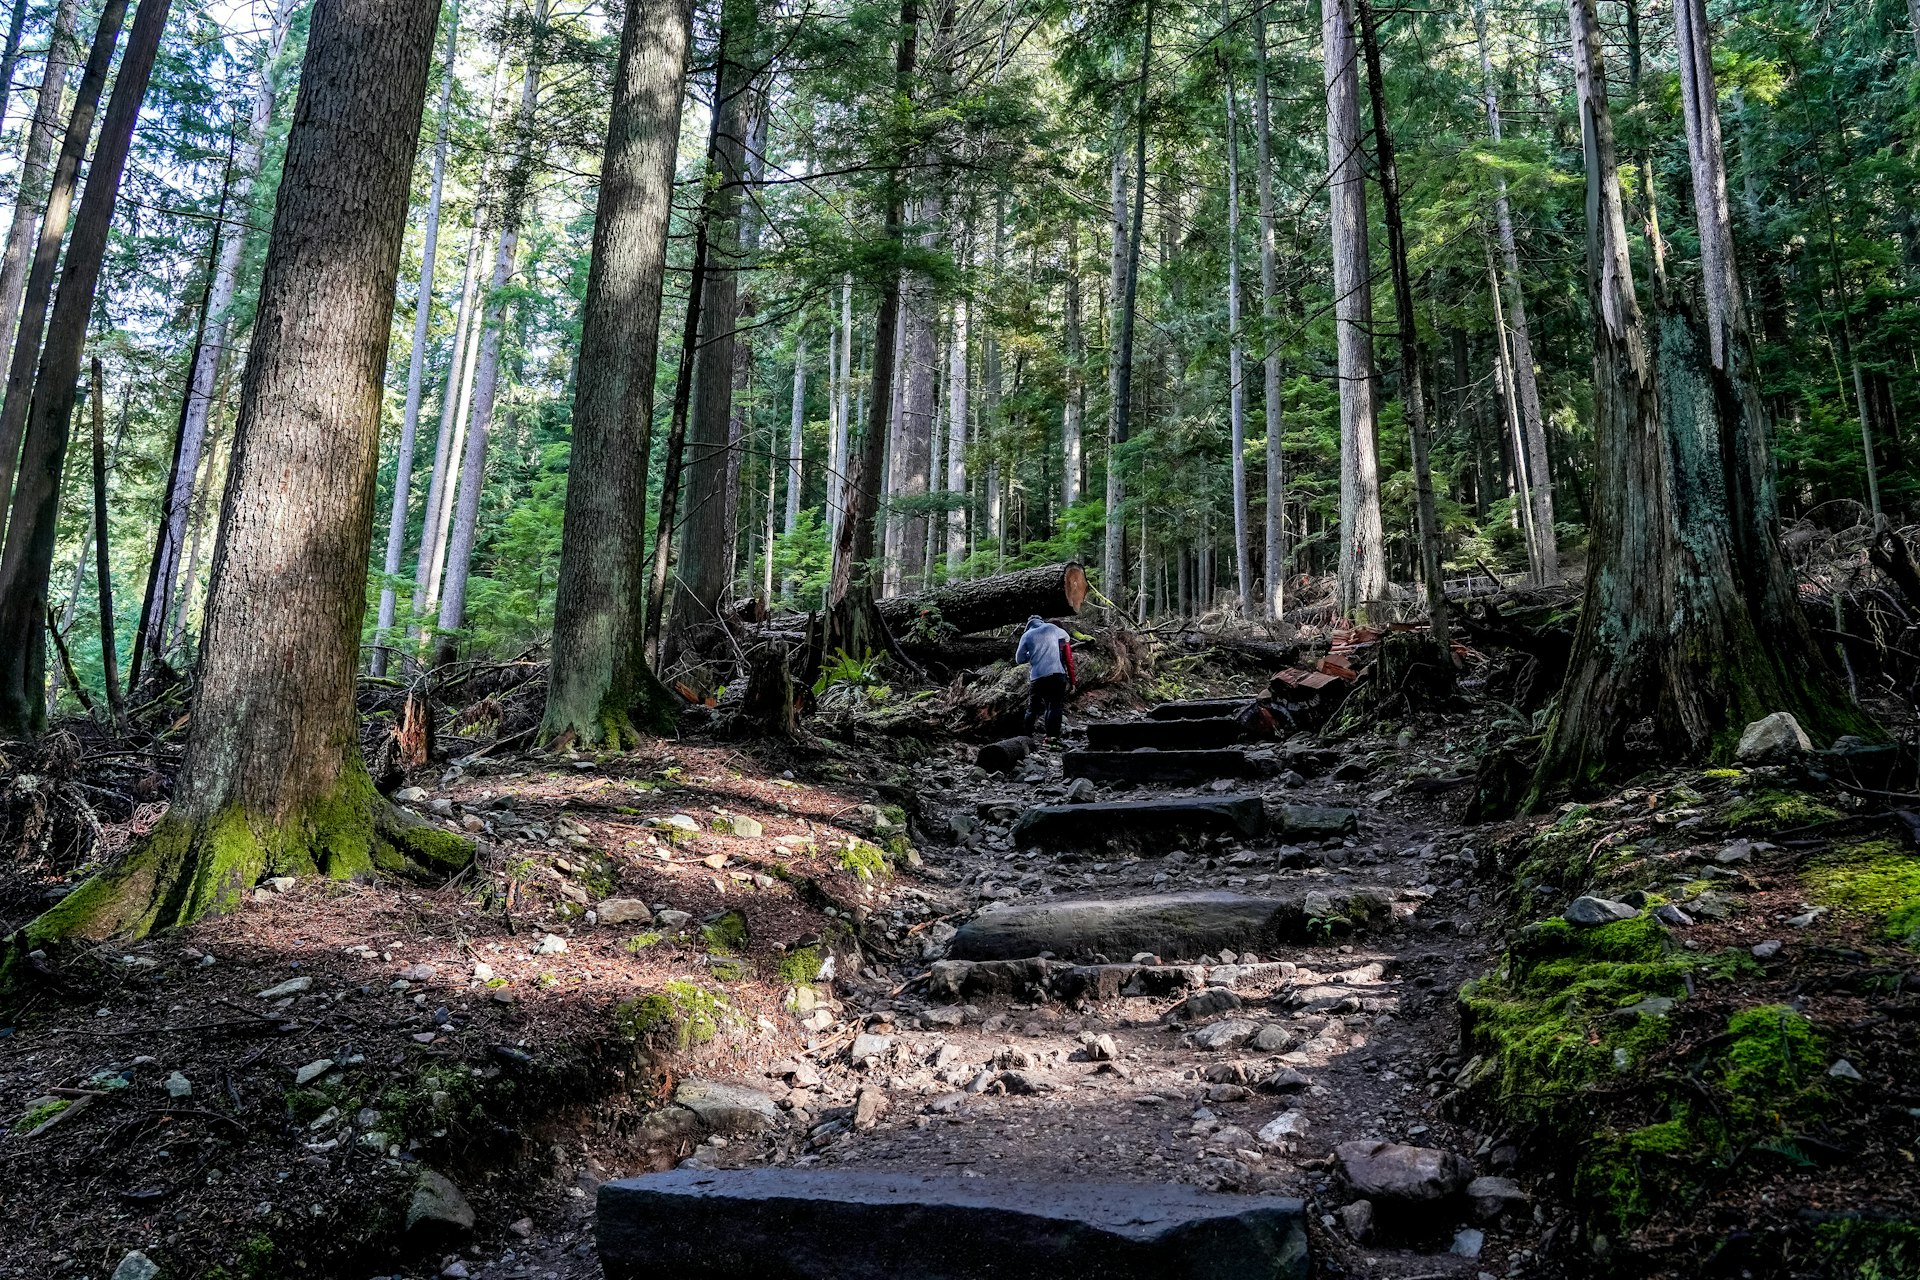 A hiker disappears down a forest path with tall trees towering in the forest